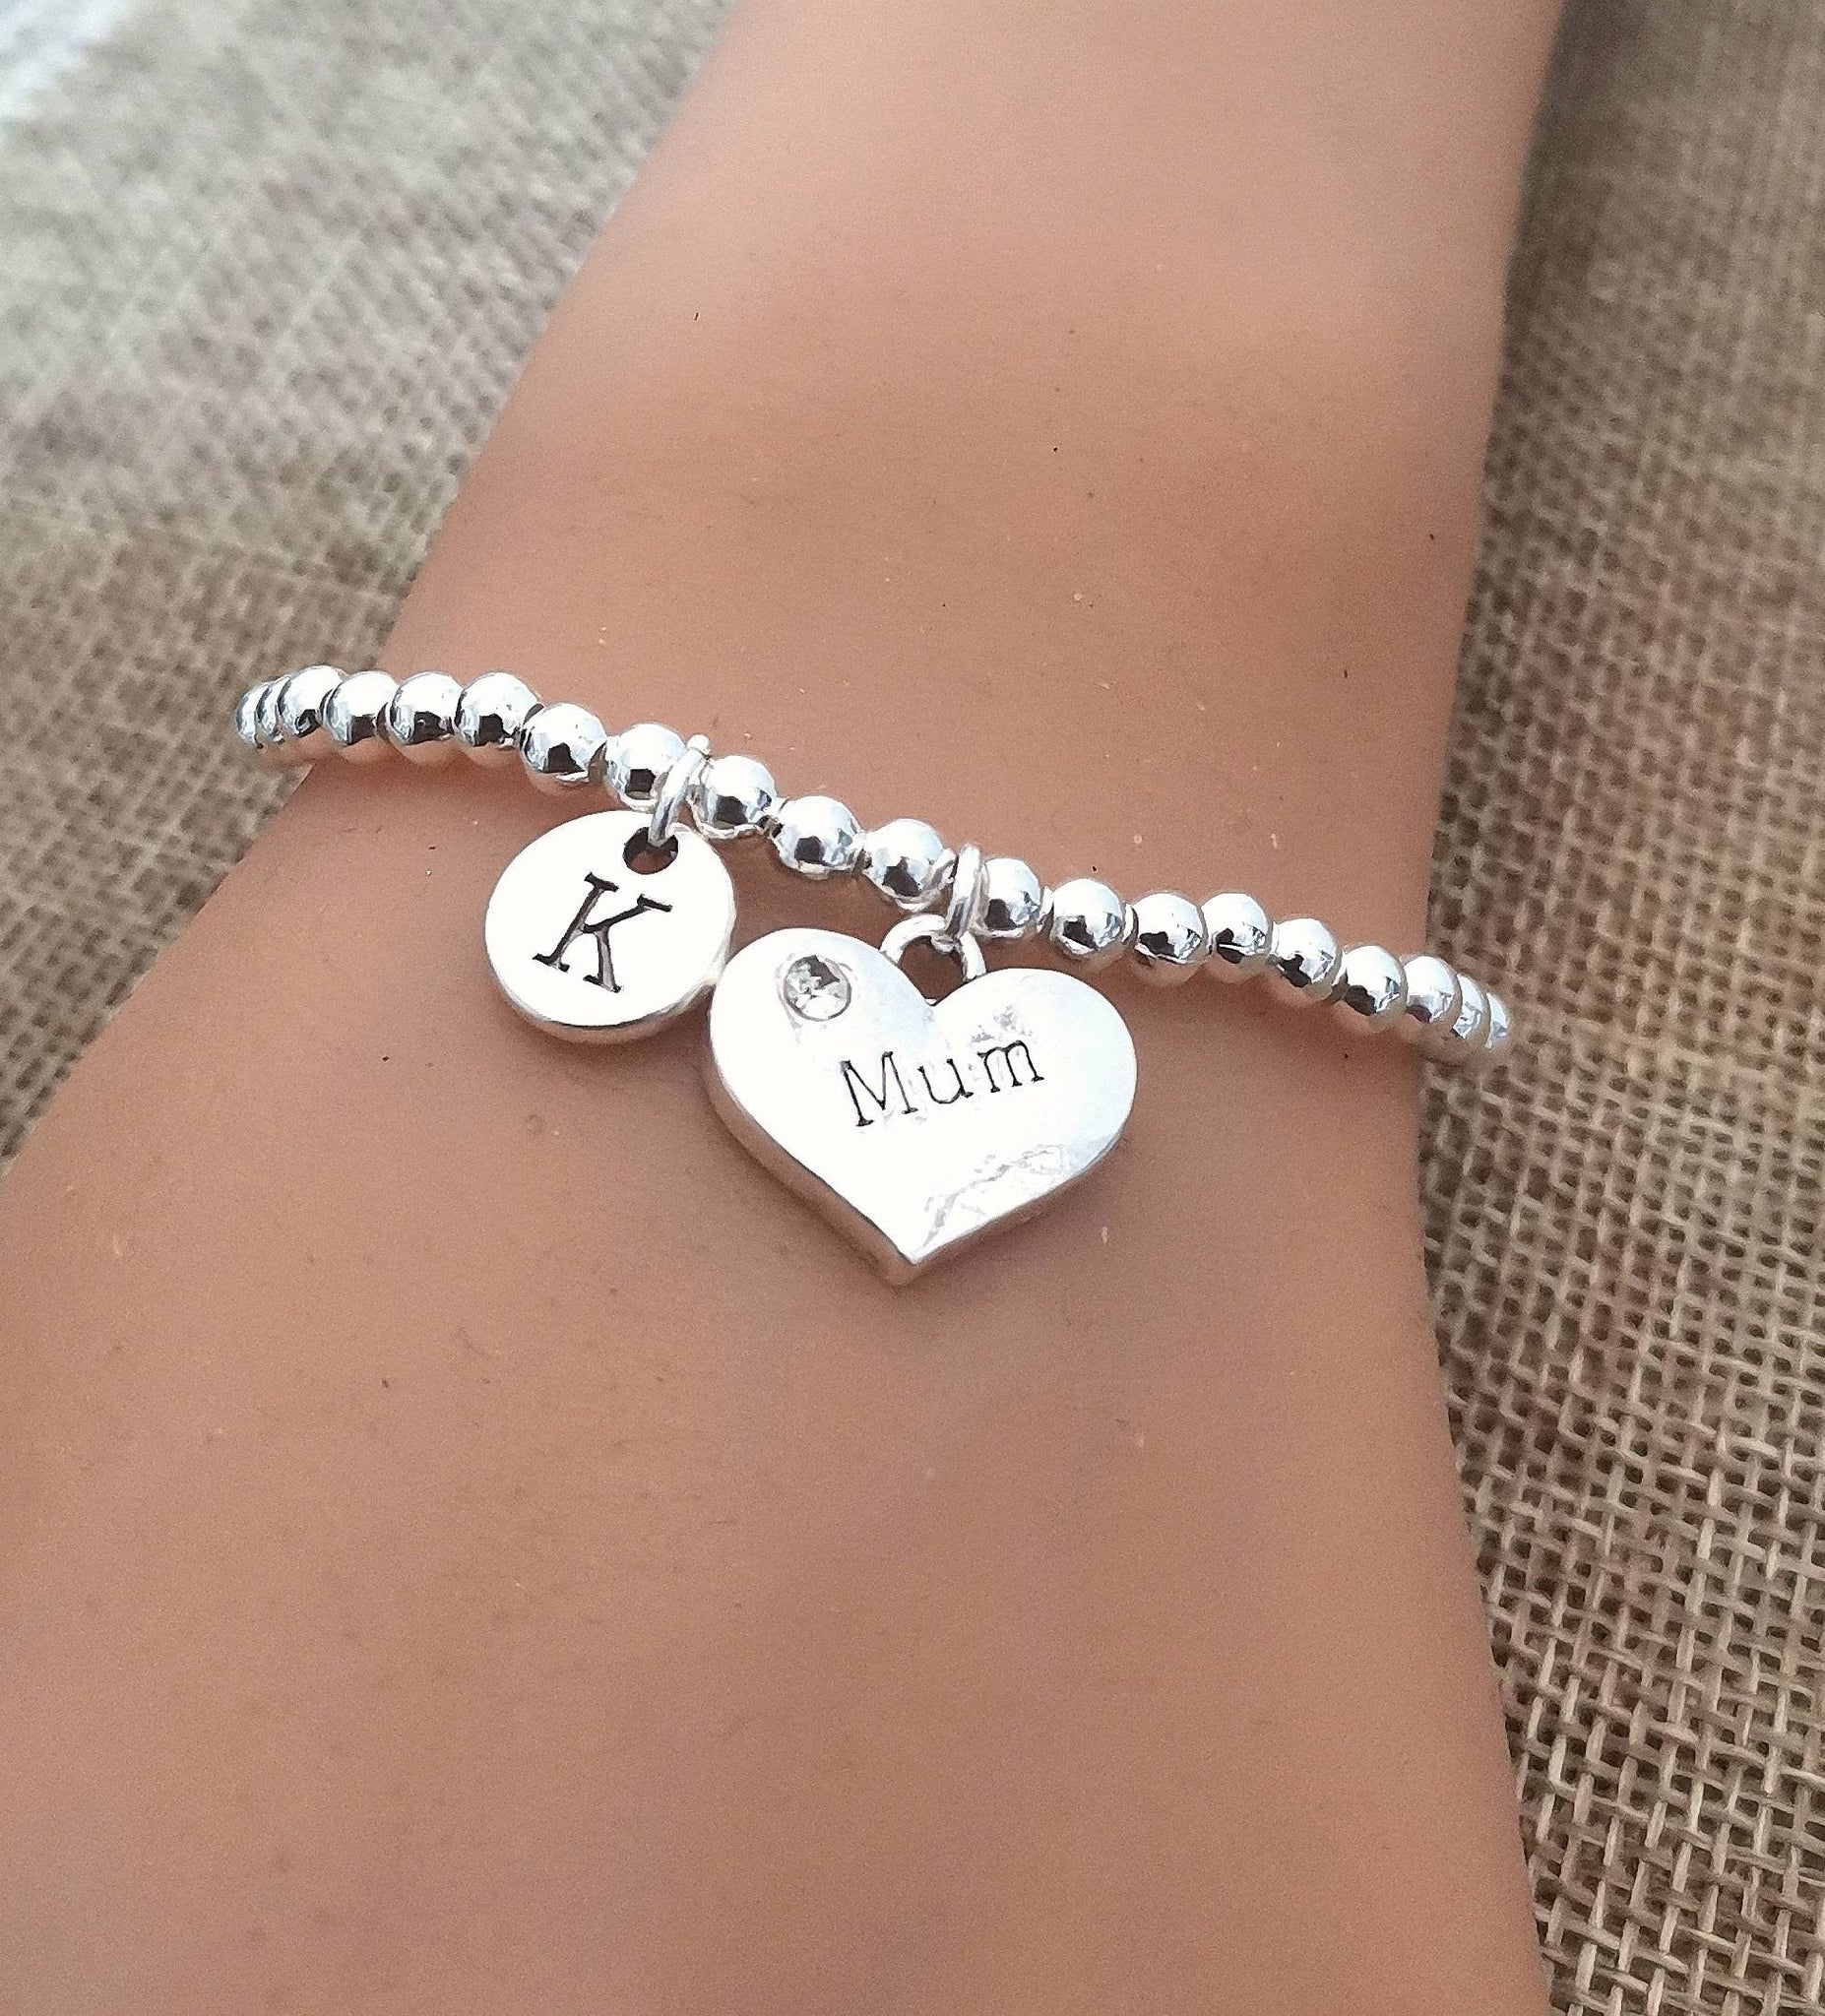 Mum bracelet, Mum gift,  Mother's day gift, Mother bracelet, Gift mother , Mother from daughter, Mother gift, Gifts for mother, parent